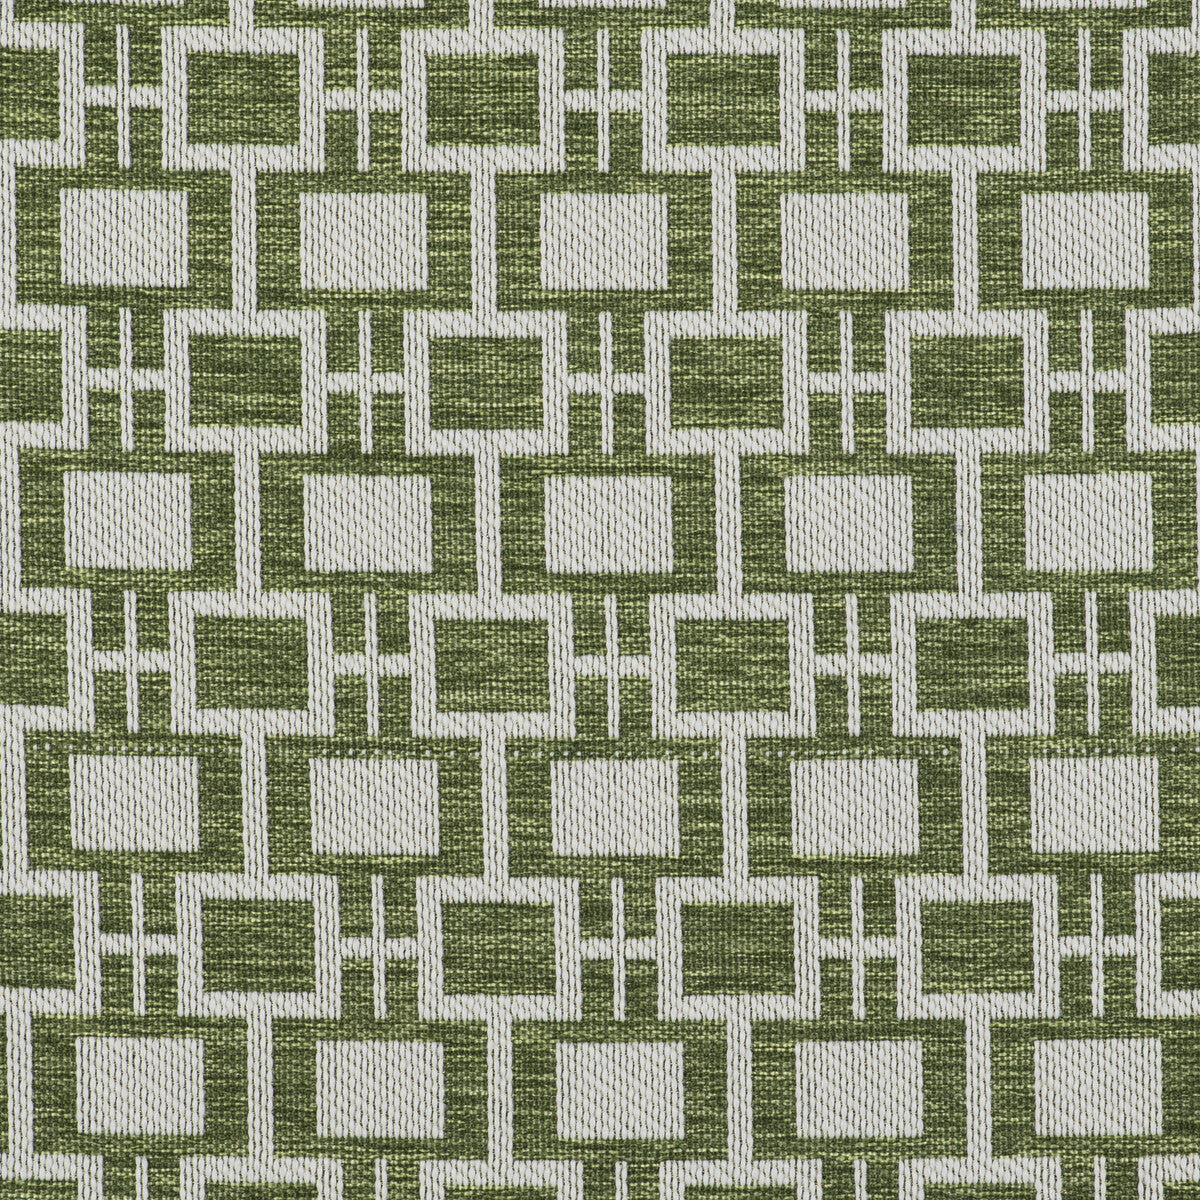 Series fabric in verde color - pattern GDT5516.003.0 - by Gaston y Daniela in the Gaston Libreria collection